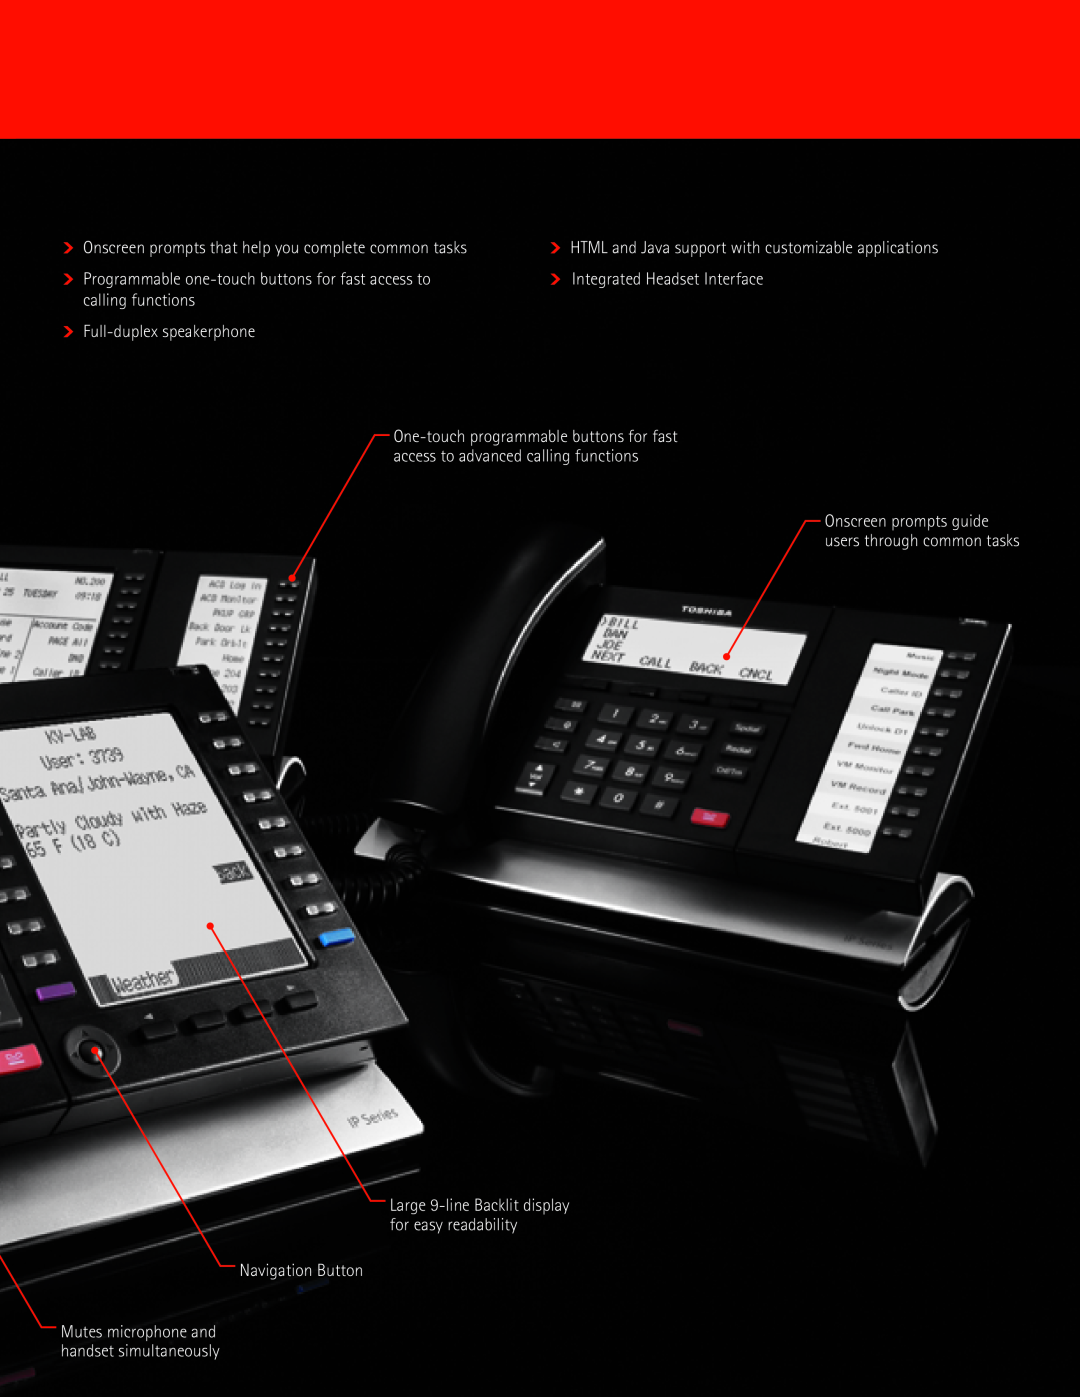 Toshiba IP Telephone Onscreen prompts that help you complete common tasks, Integrated Headset Interface, calling functions 